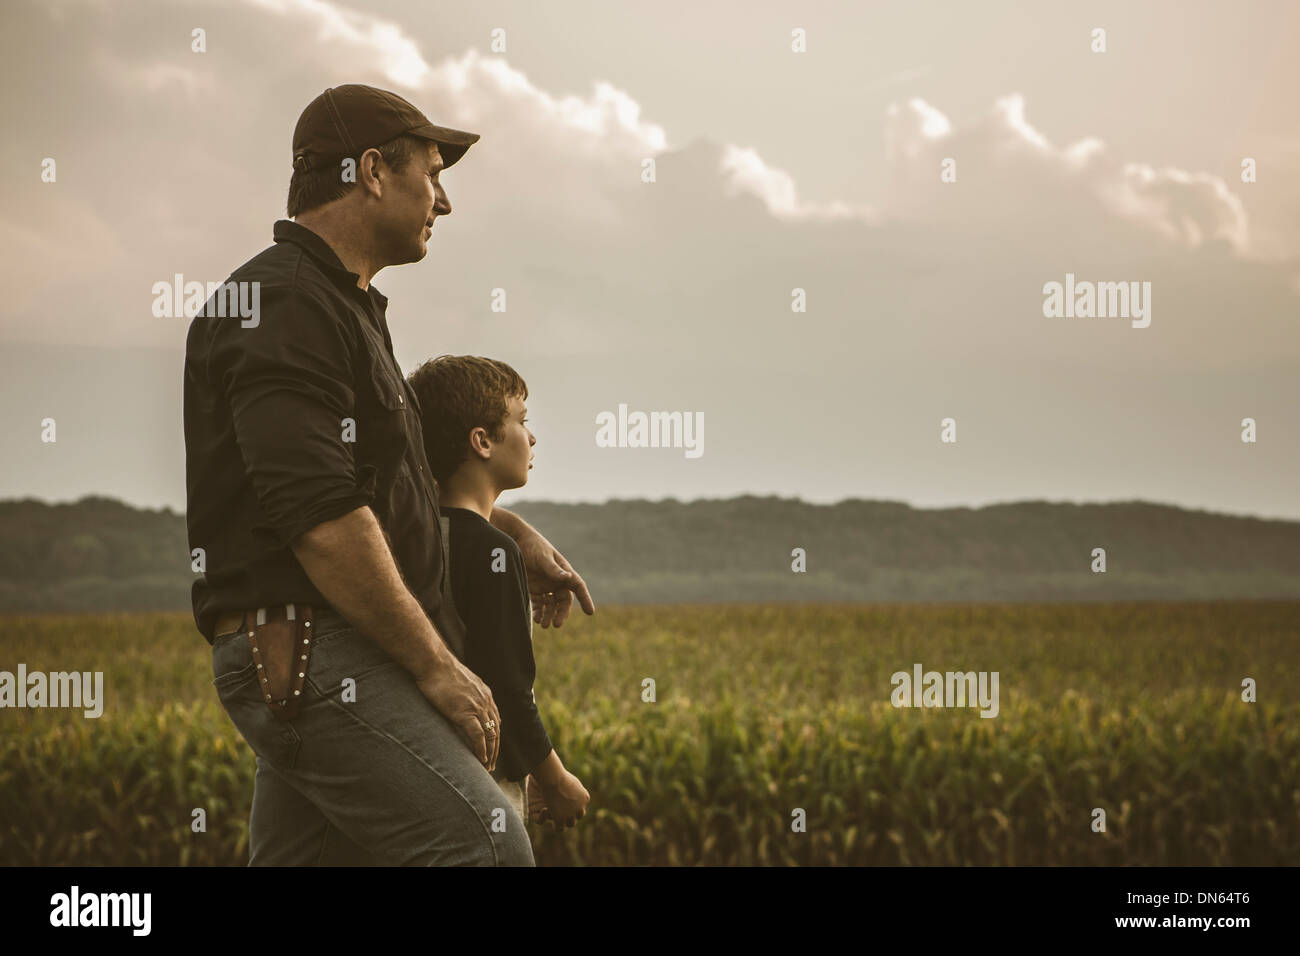 Caucasian father and son overlooking crop fields Stock Photo